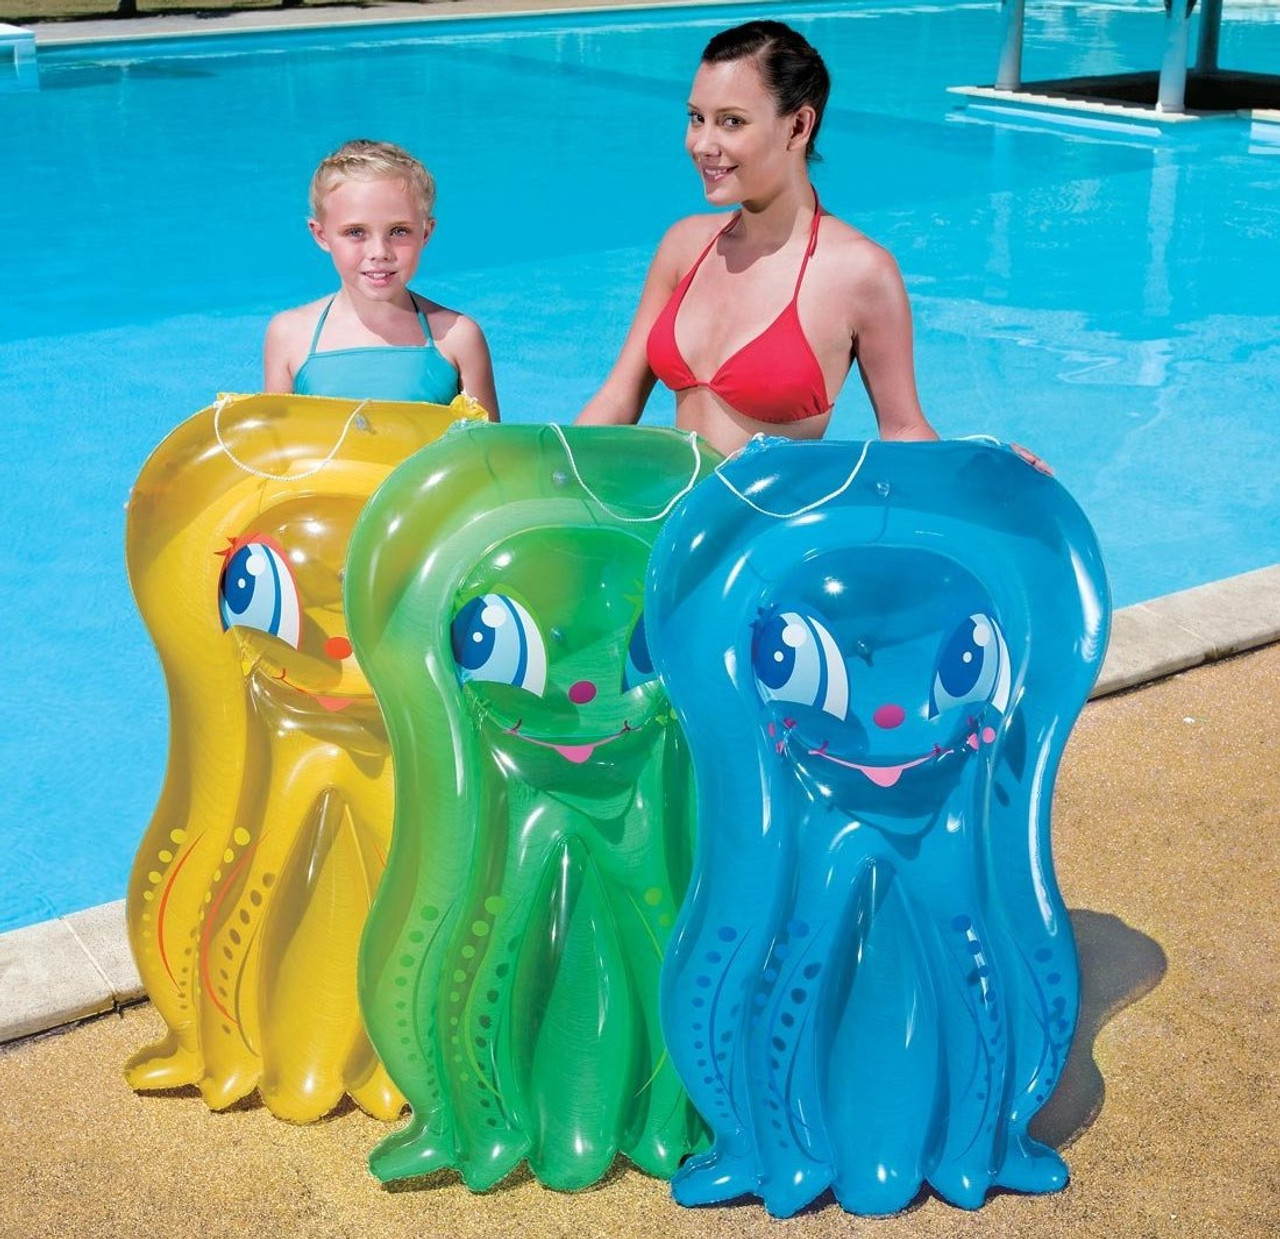 inflatable octopus pool float